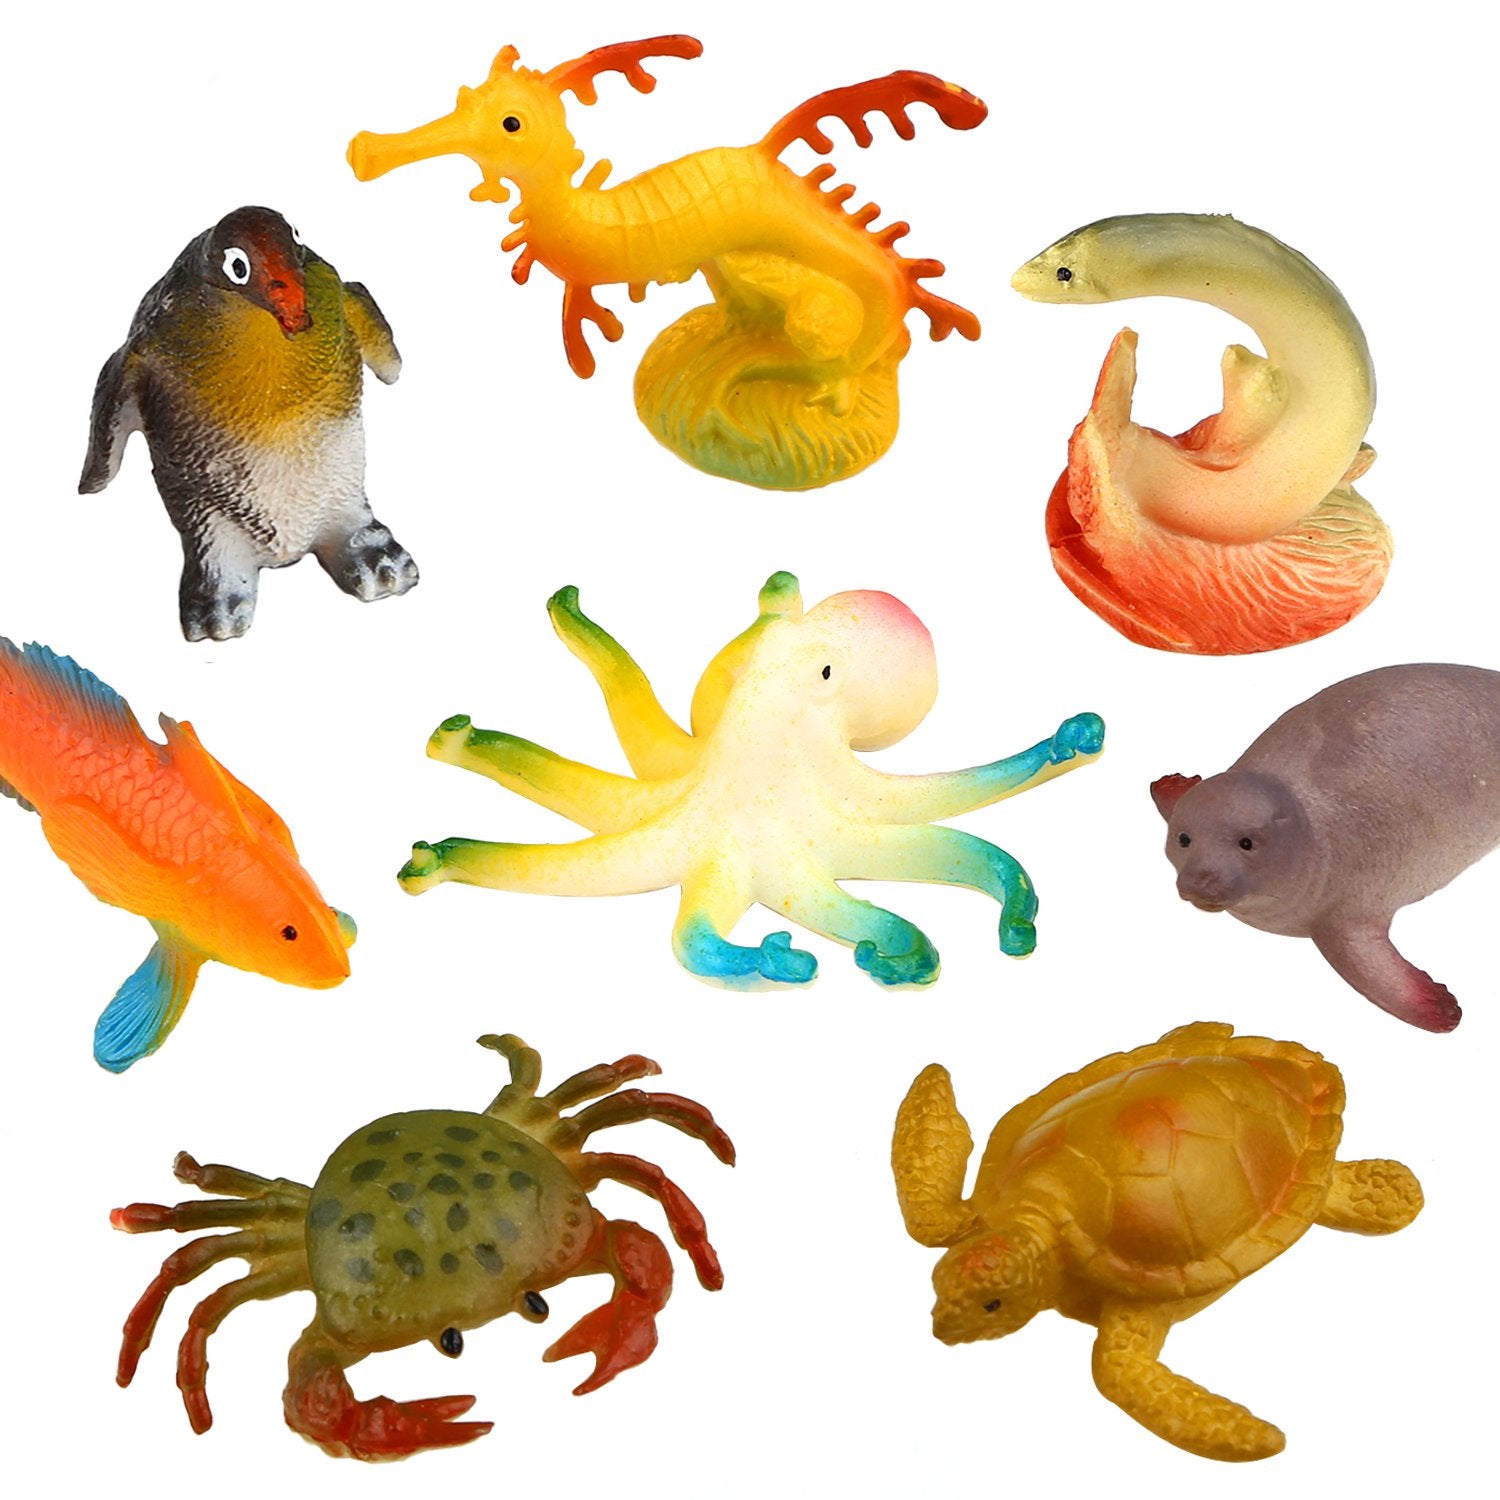 Ocean Sea Animal, 52 Pack Assorted Mini Vinyl Plastic Animal Toy Set, Funcorn Toys Realistic Under The Sea Life Figure Bath Toy for Child Educational Party Cake Cupcake Topper,Octopus Shark Otter